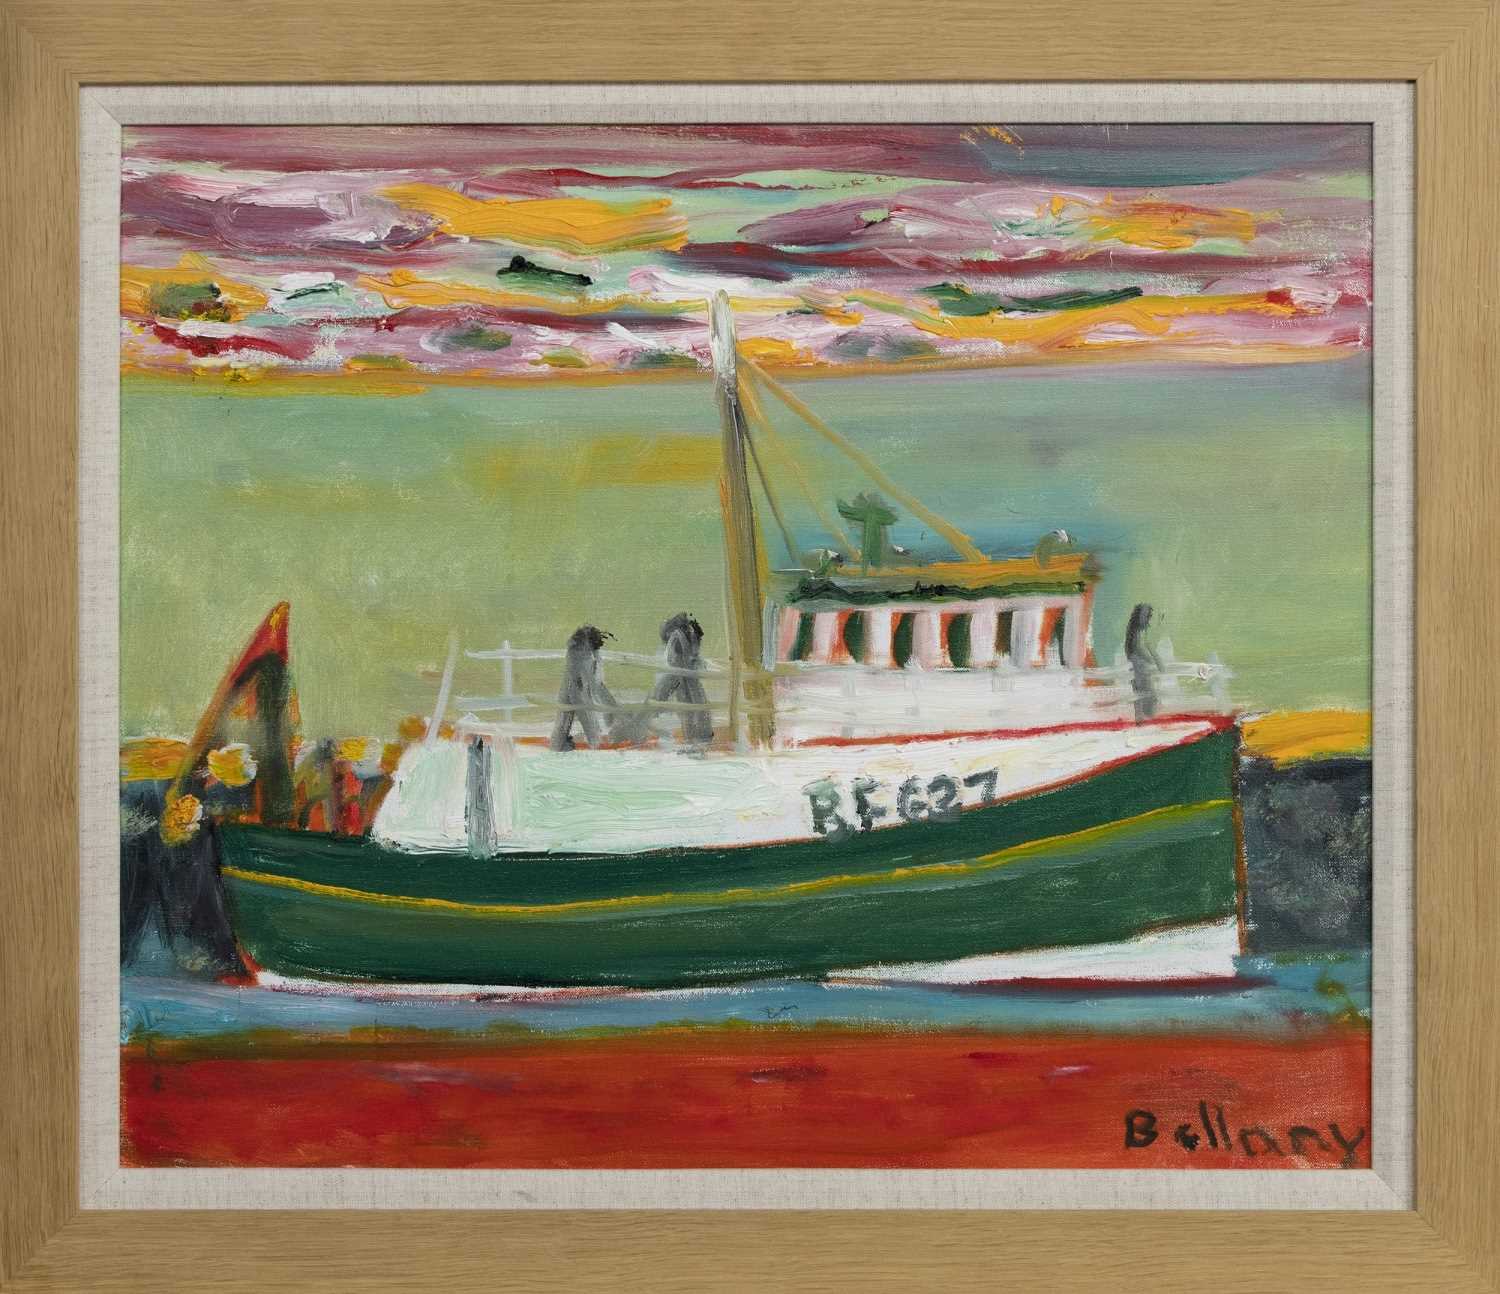 SUNSET TRAWLING, AN OIL BY JOHN BELLANY